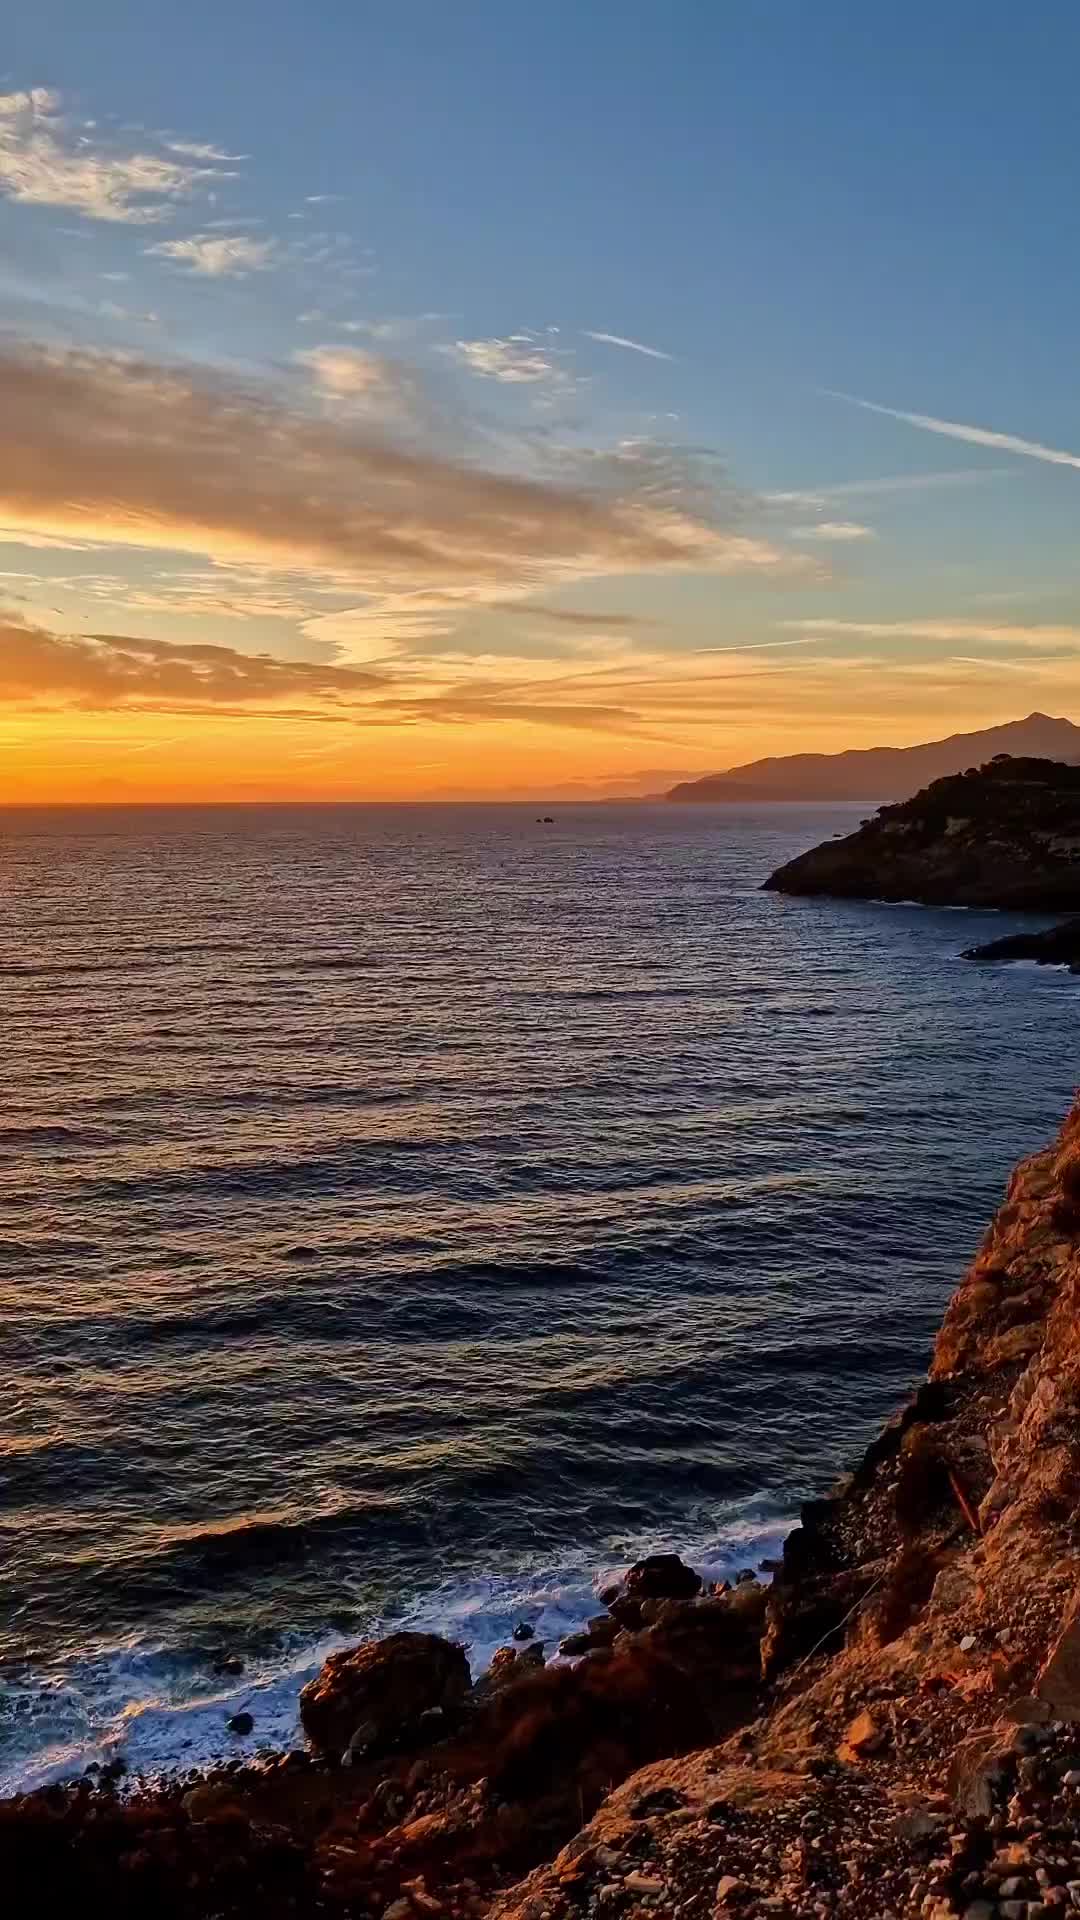 Stunning Sunset at Isola d'Elba - A Must-See Experience